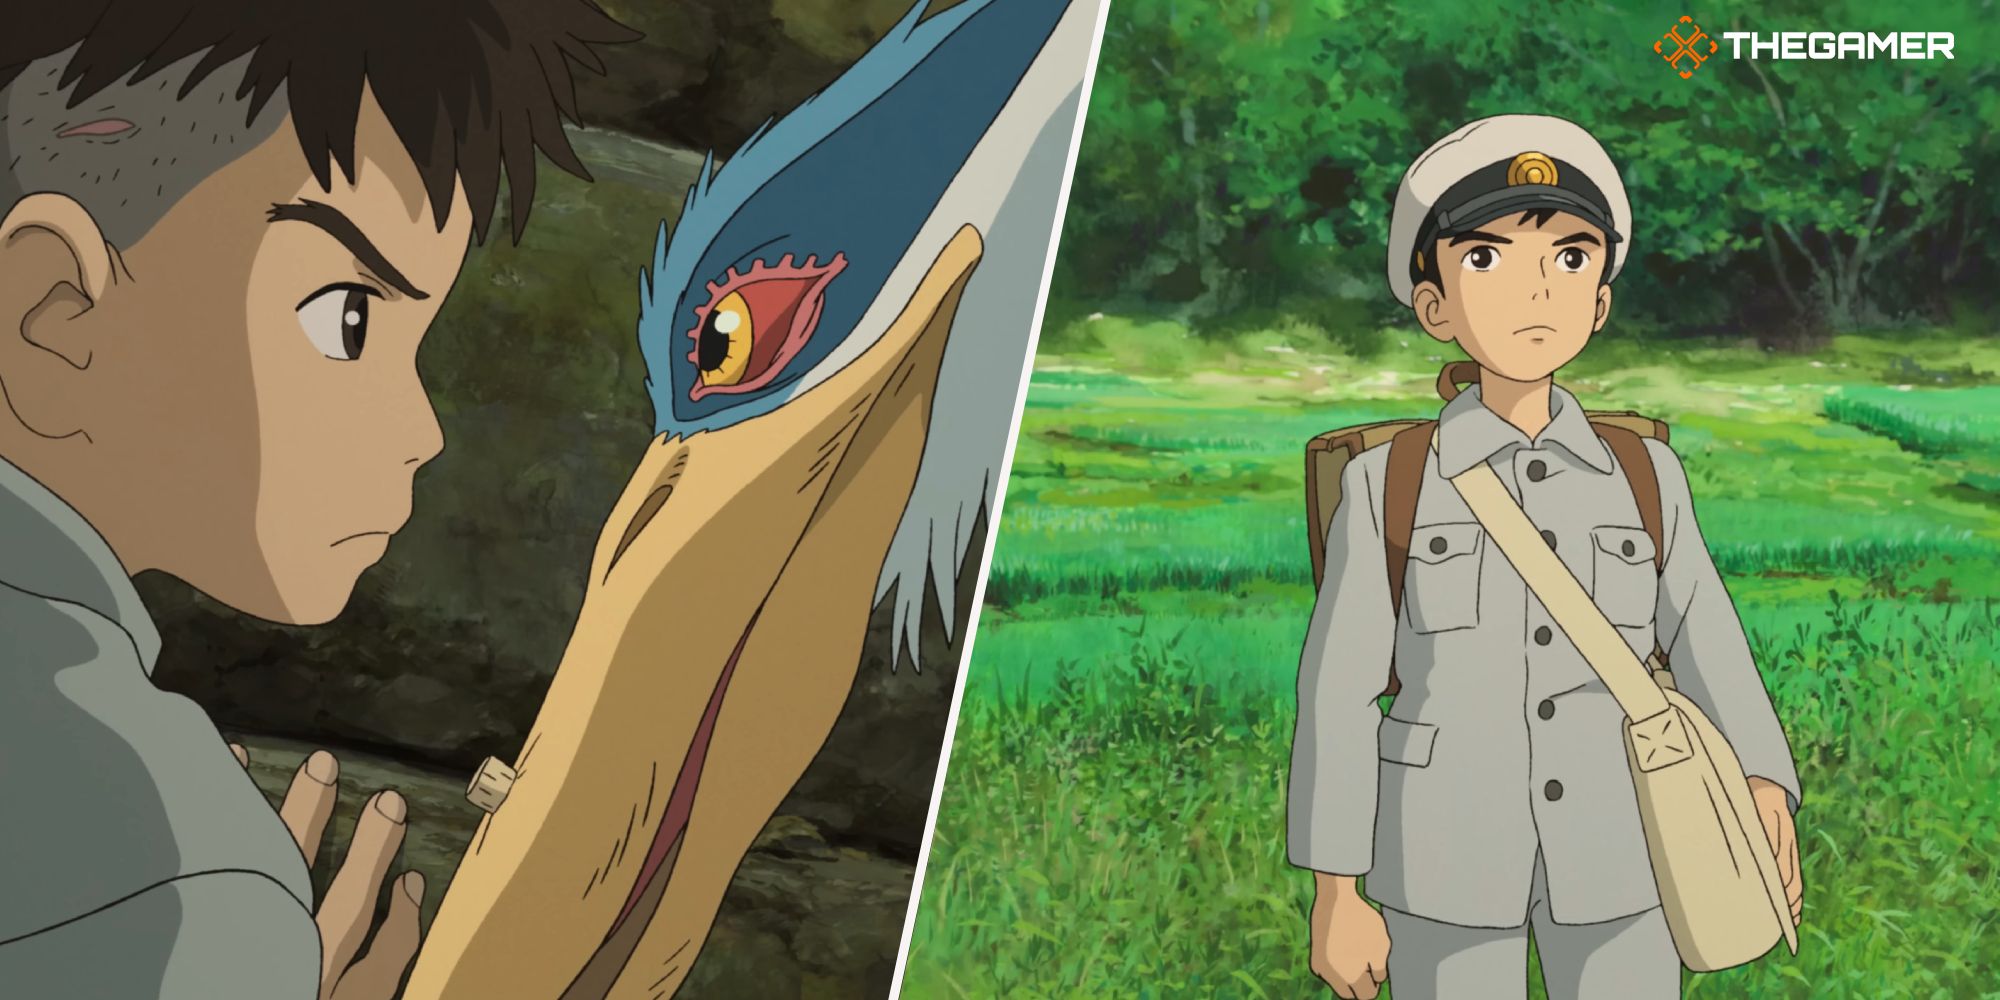 Left, Mahito and the Grey Heron face against each other. Right, Mahito stands in a field of grass.